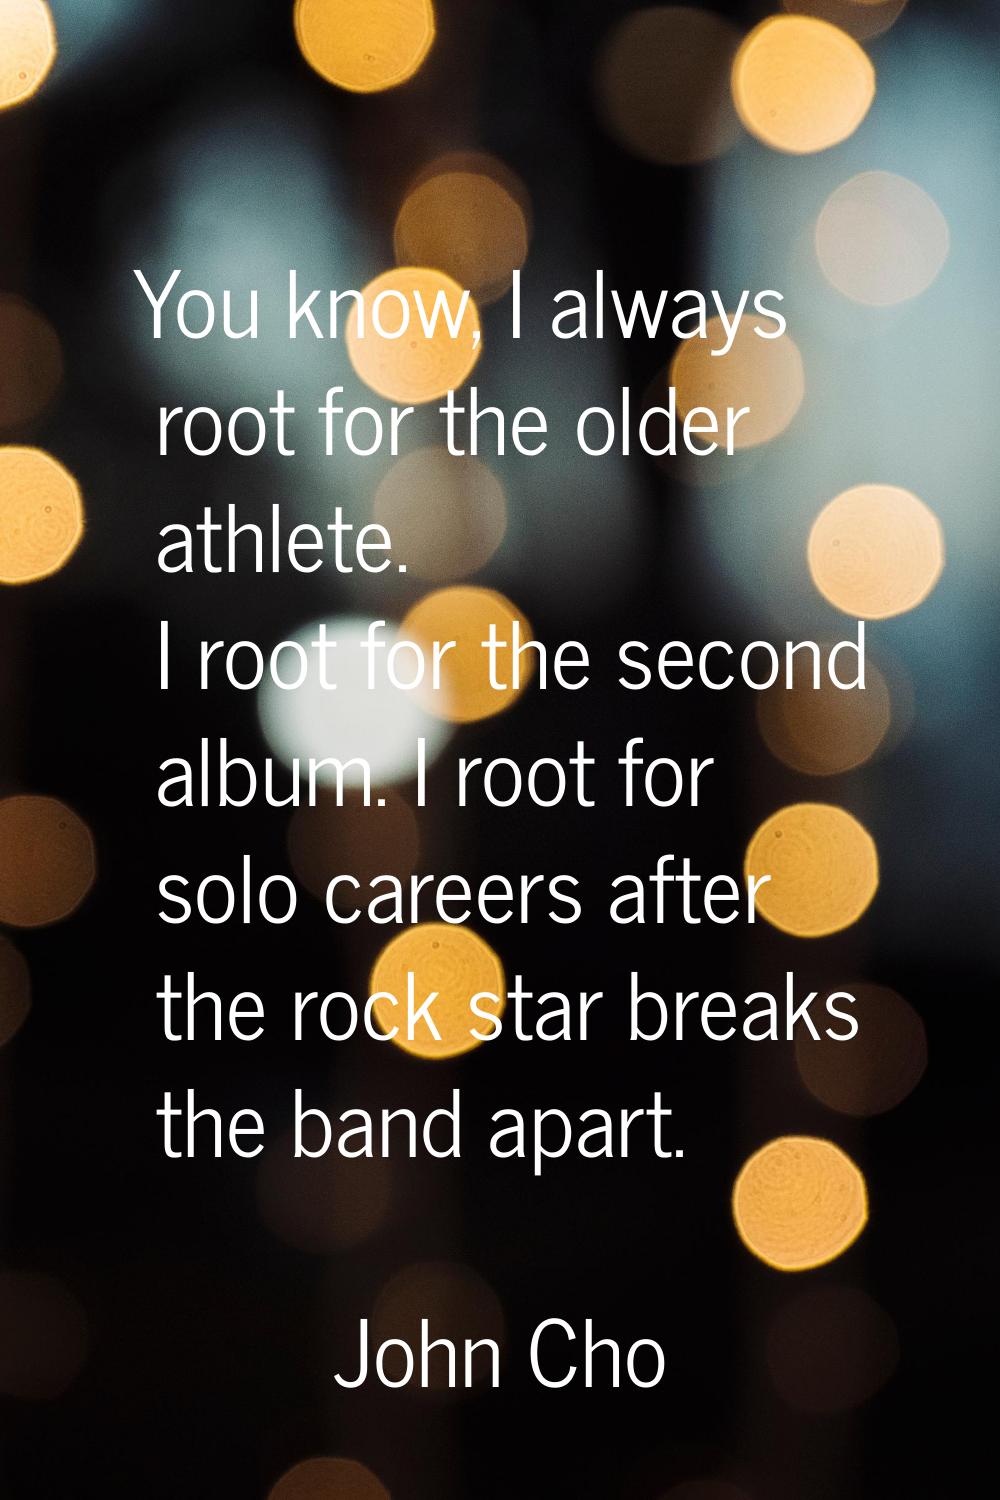 You know, I always root for the older athlete. I root for the second album. I root for solo careers